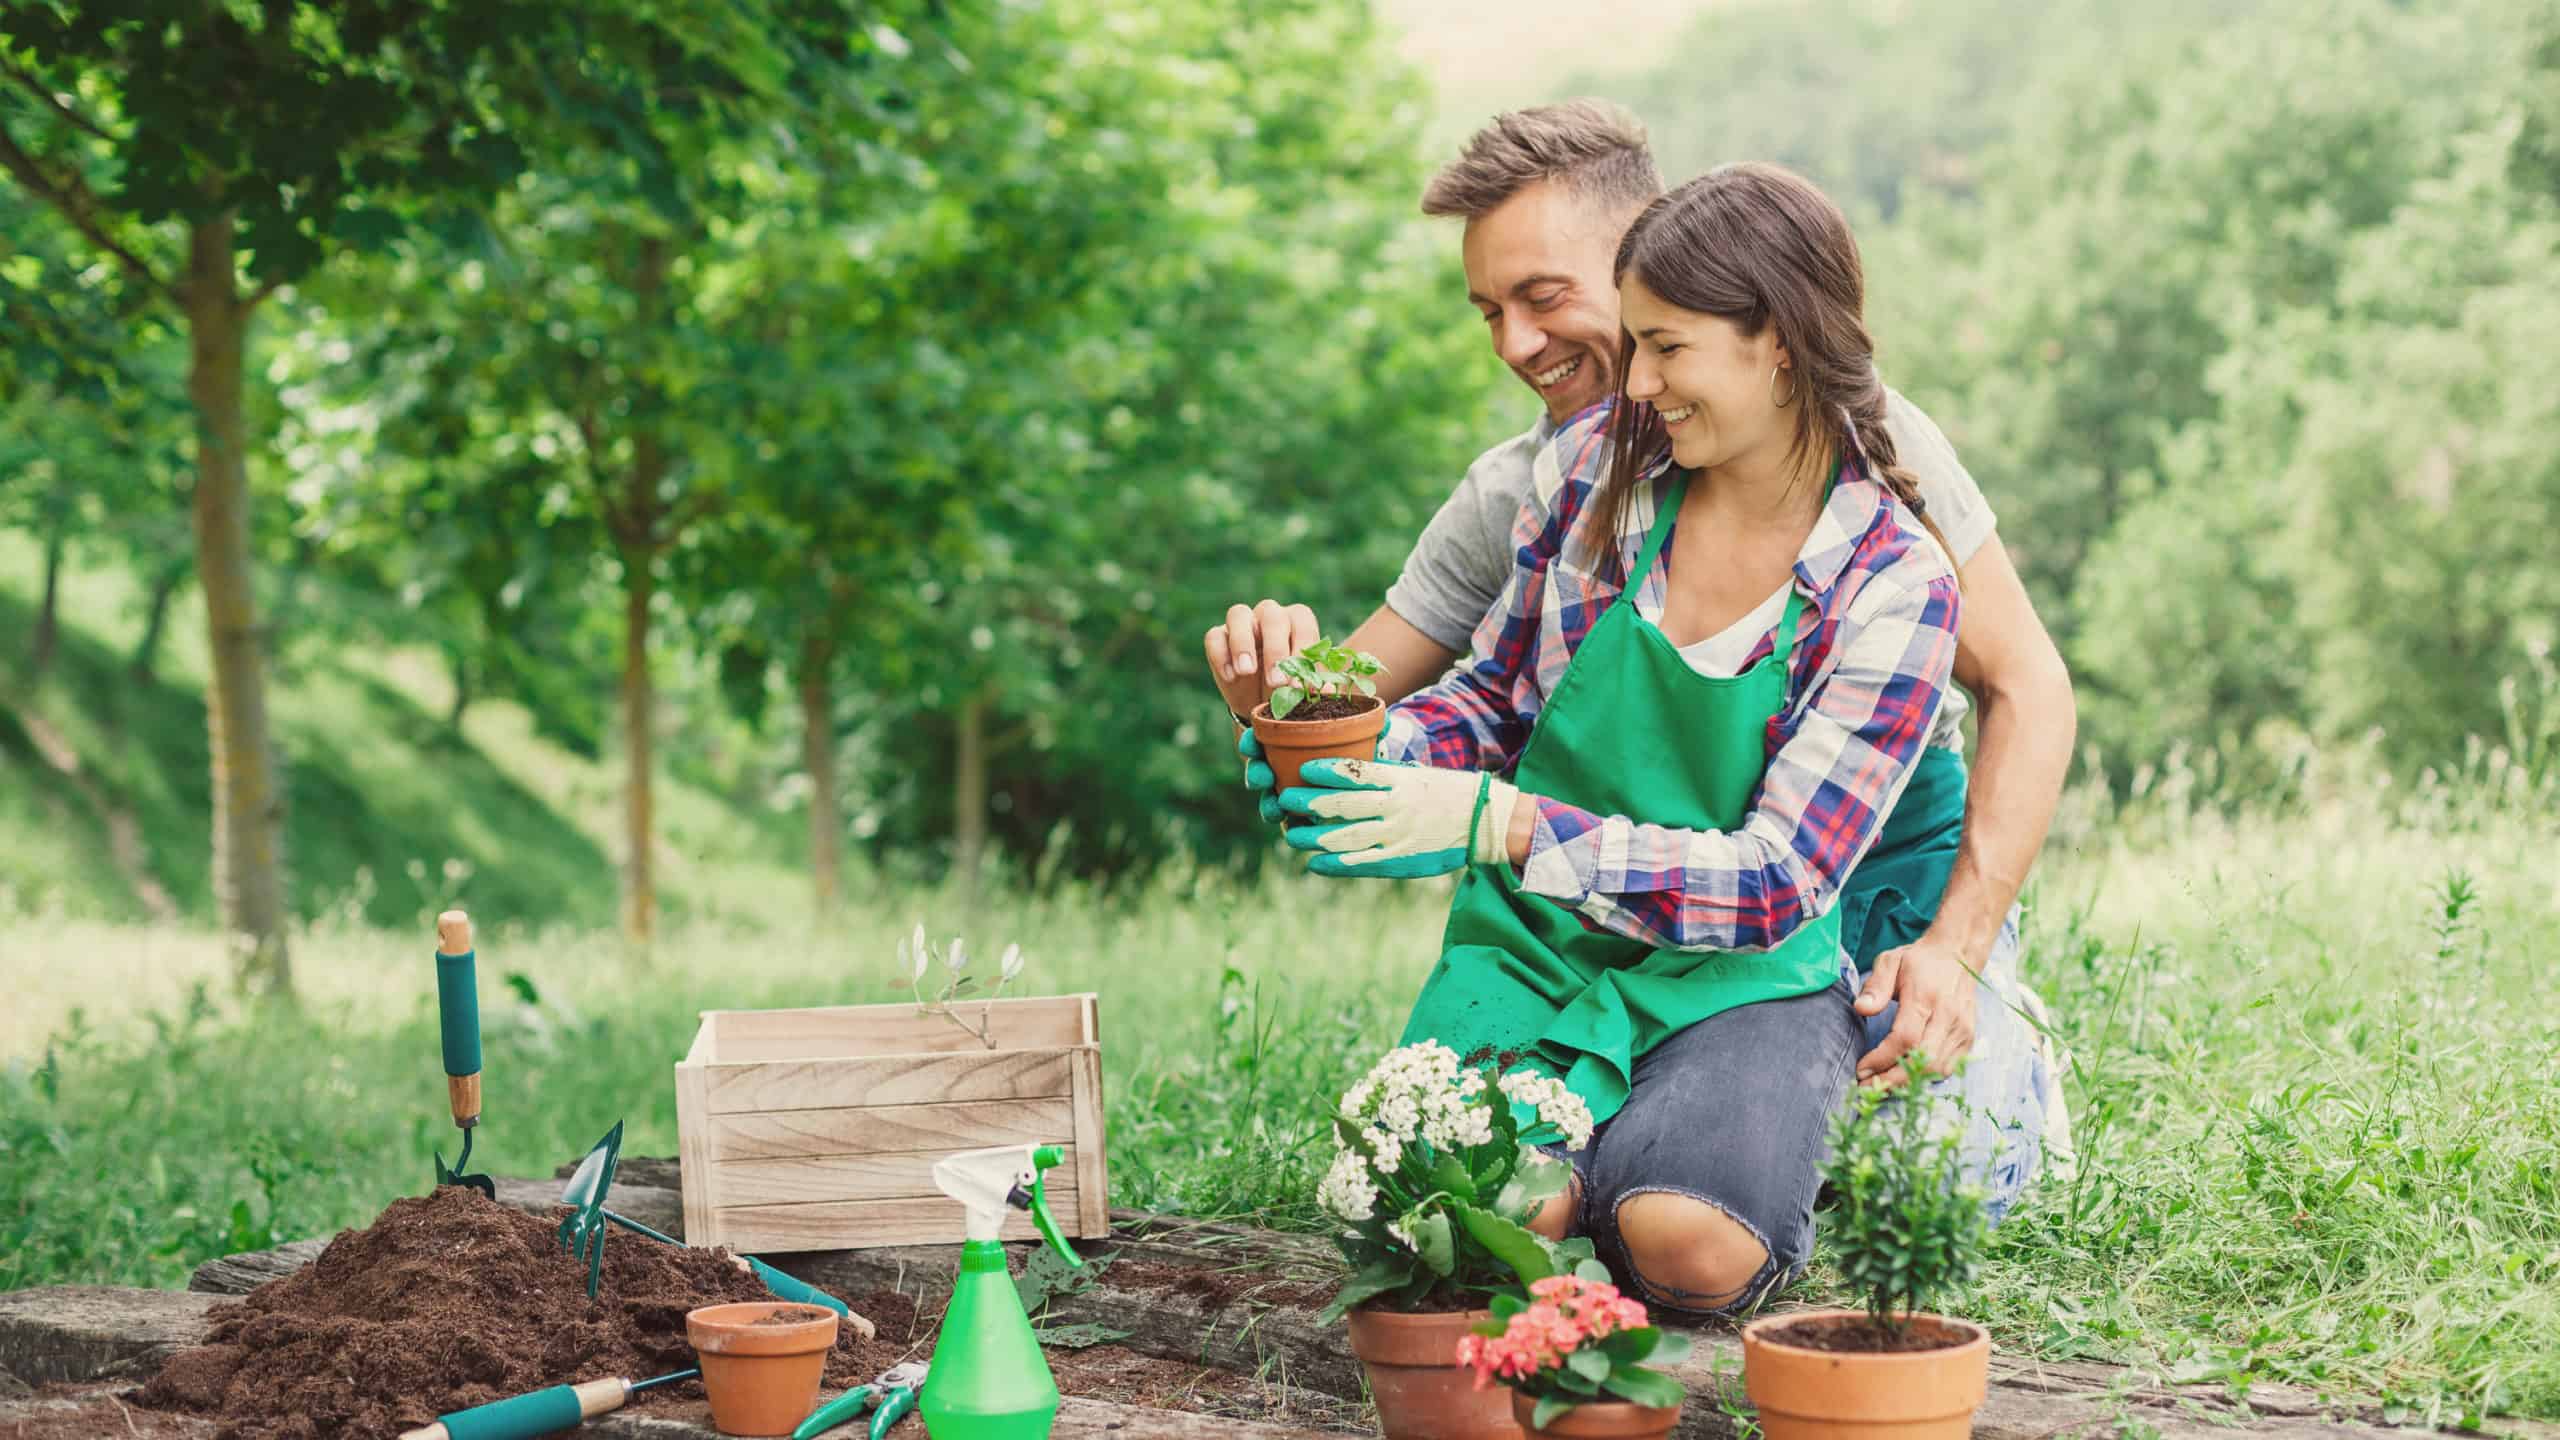 Young loving couple practice self-care by having fun with gardening work on a wooden floor during spring day